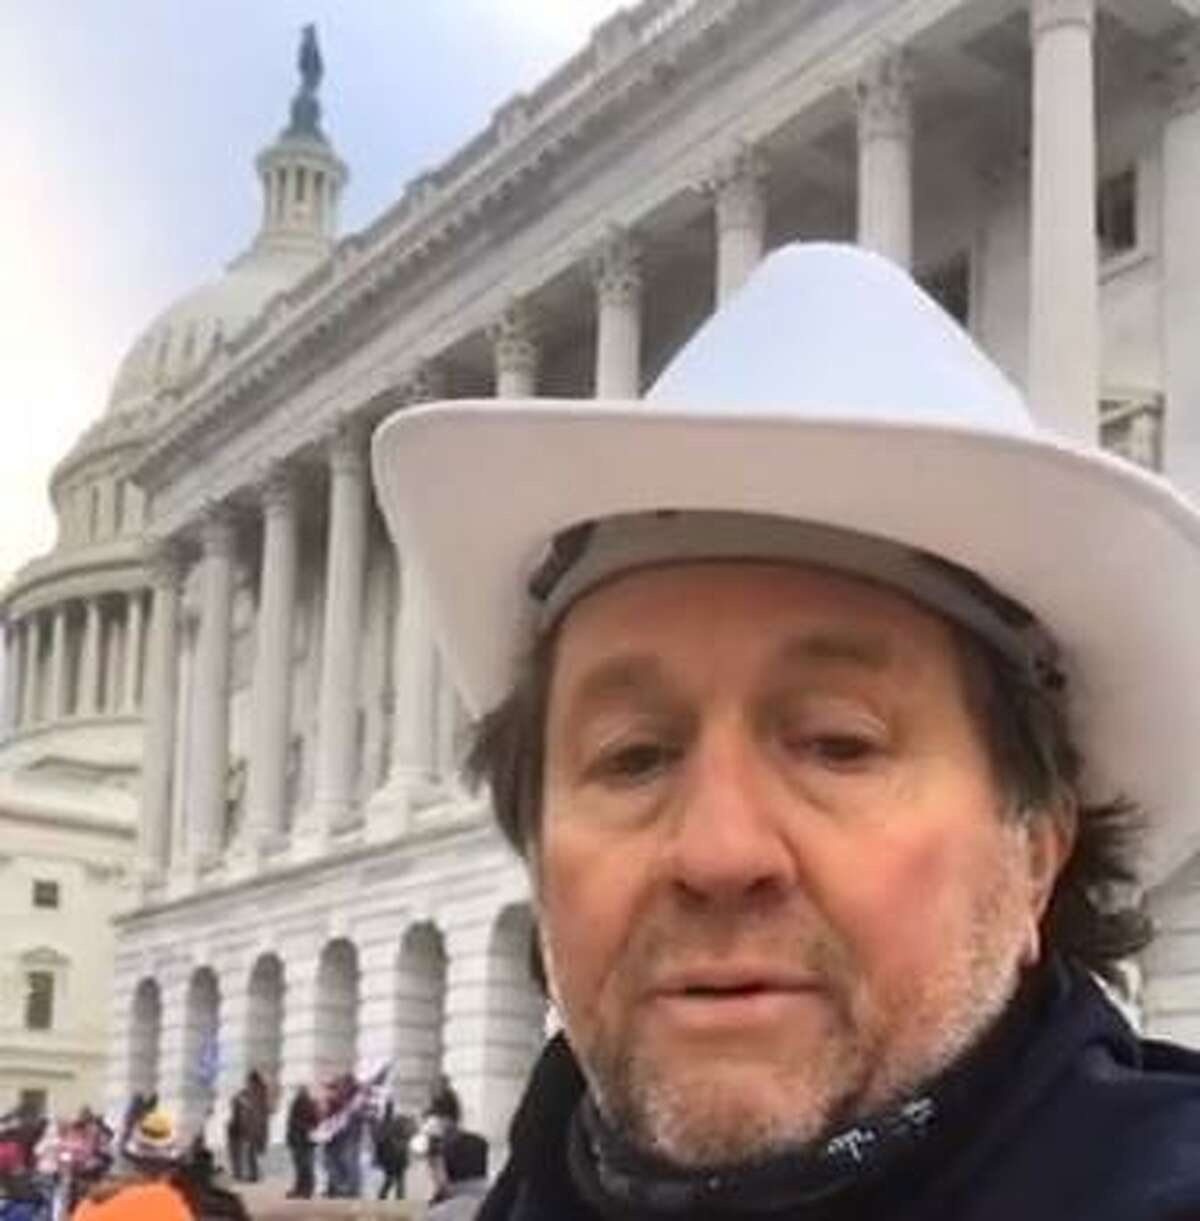 Connecticut Resident Joe Visconti outside the U.S. Capitol Wednesday as a pro-Trump mob entered the building.